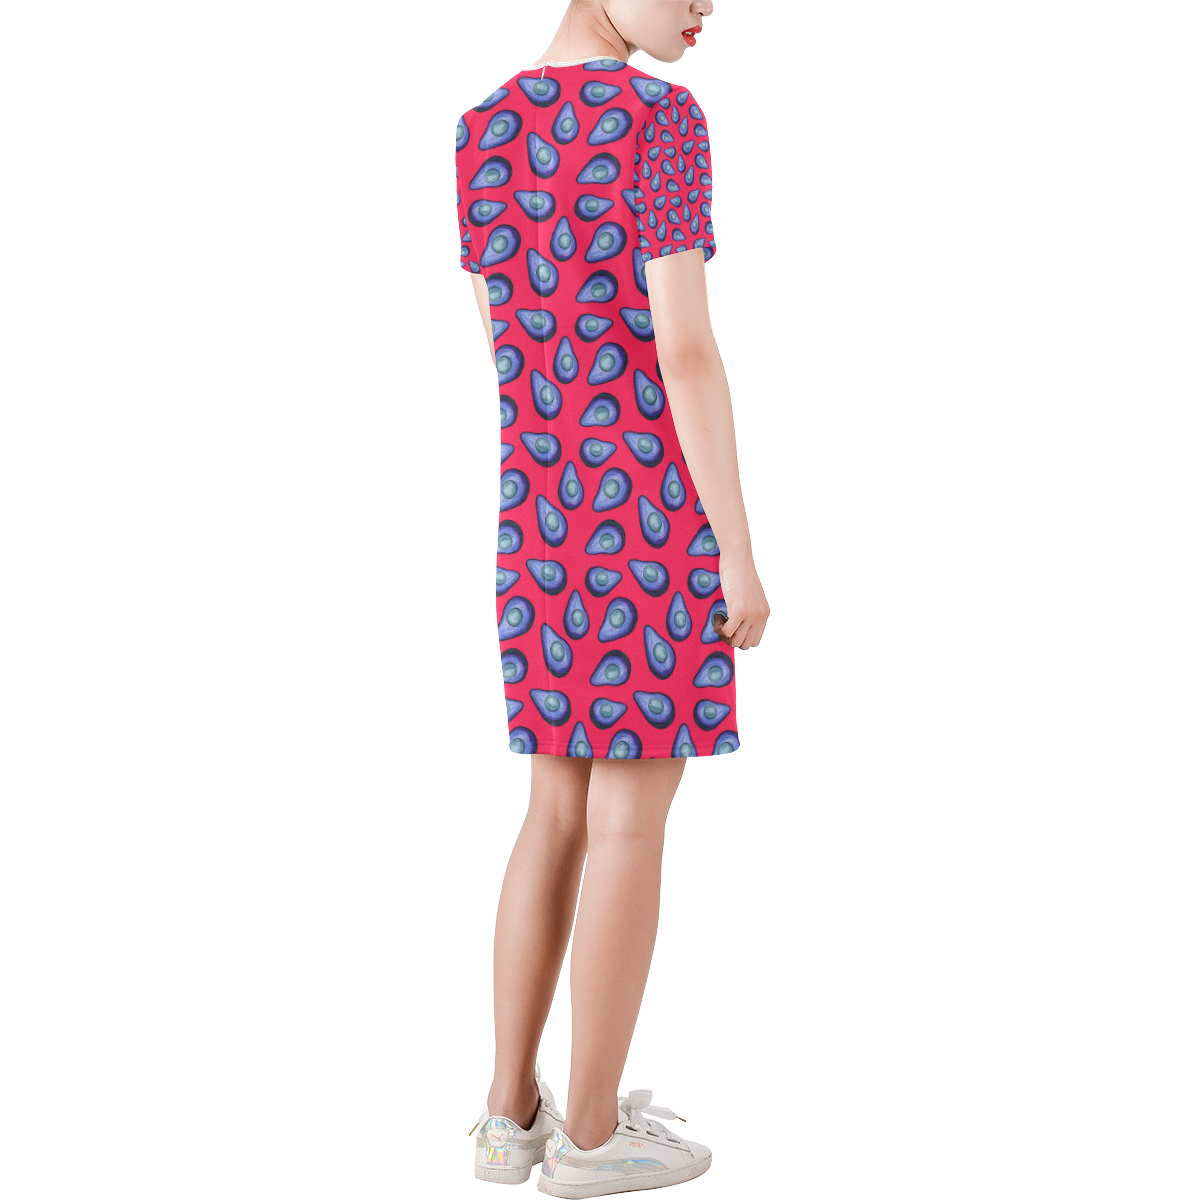 tropical pink avocadoes Short-Sleeve Round Neck A-Line Dress (Model D47)